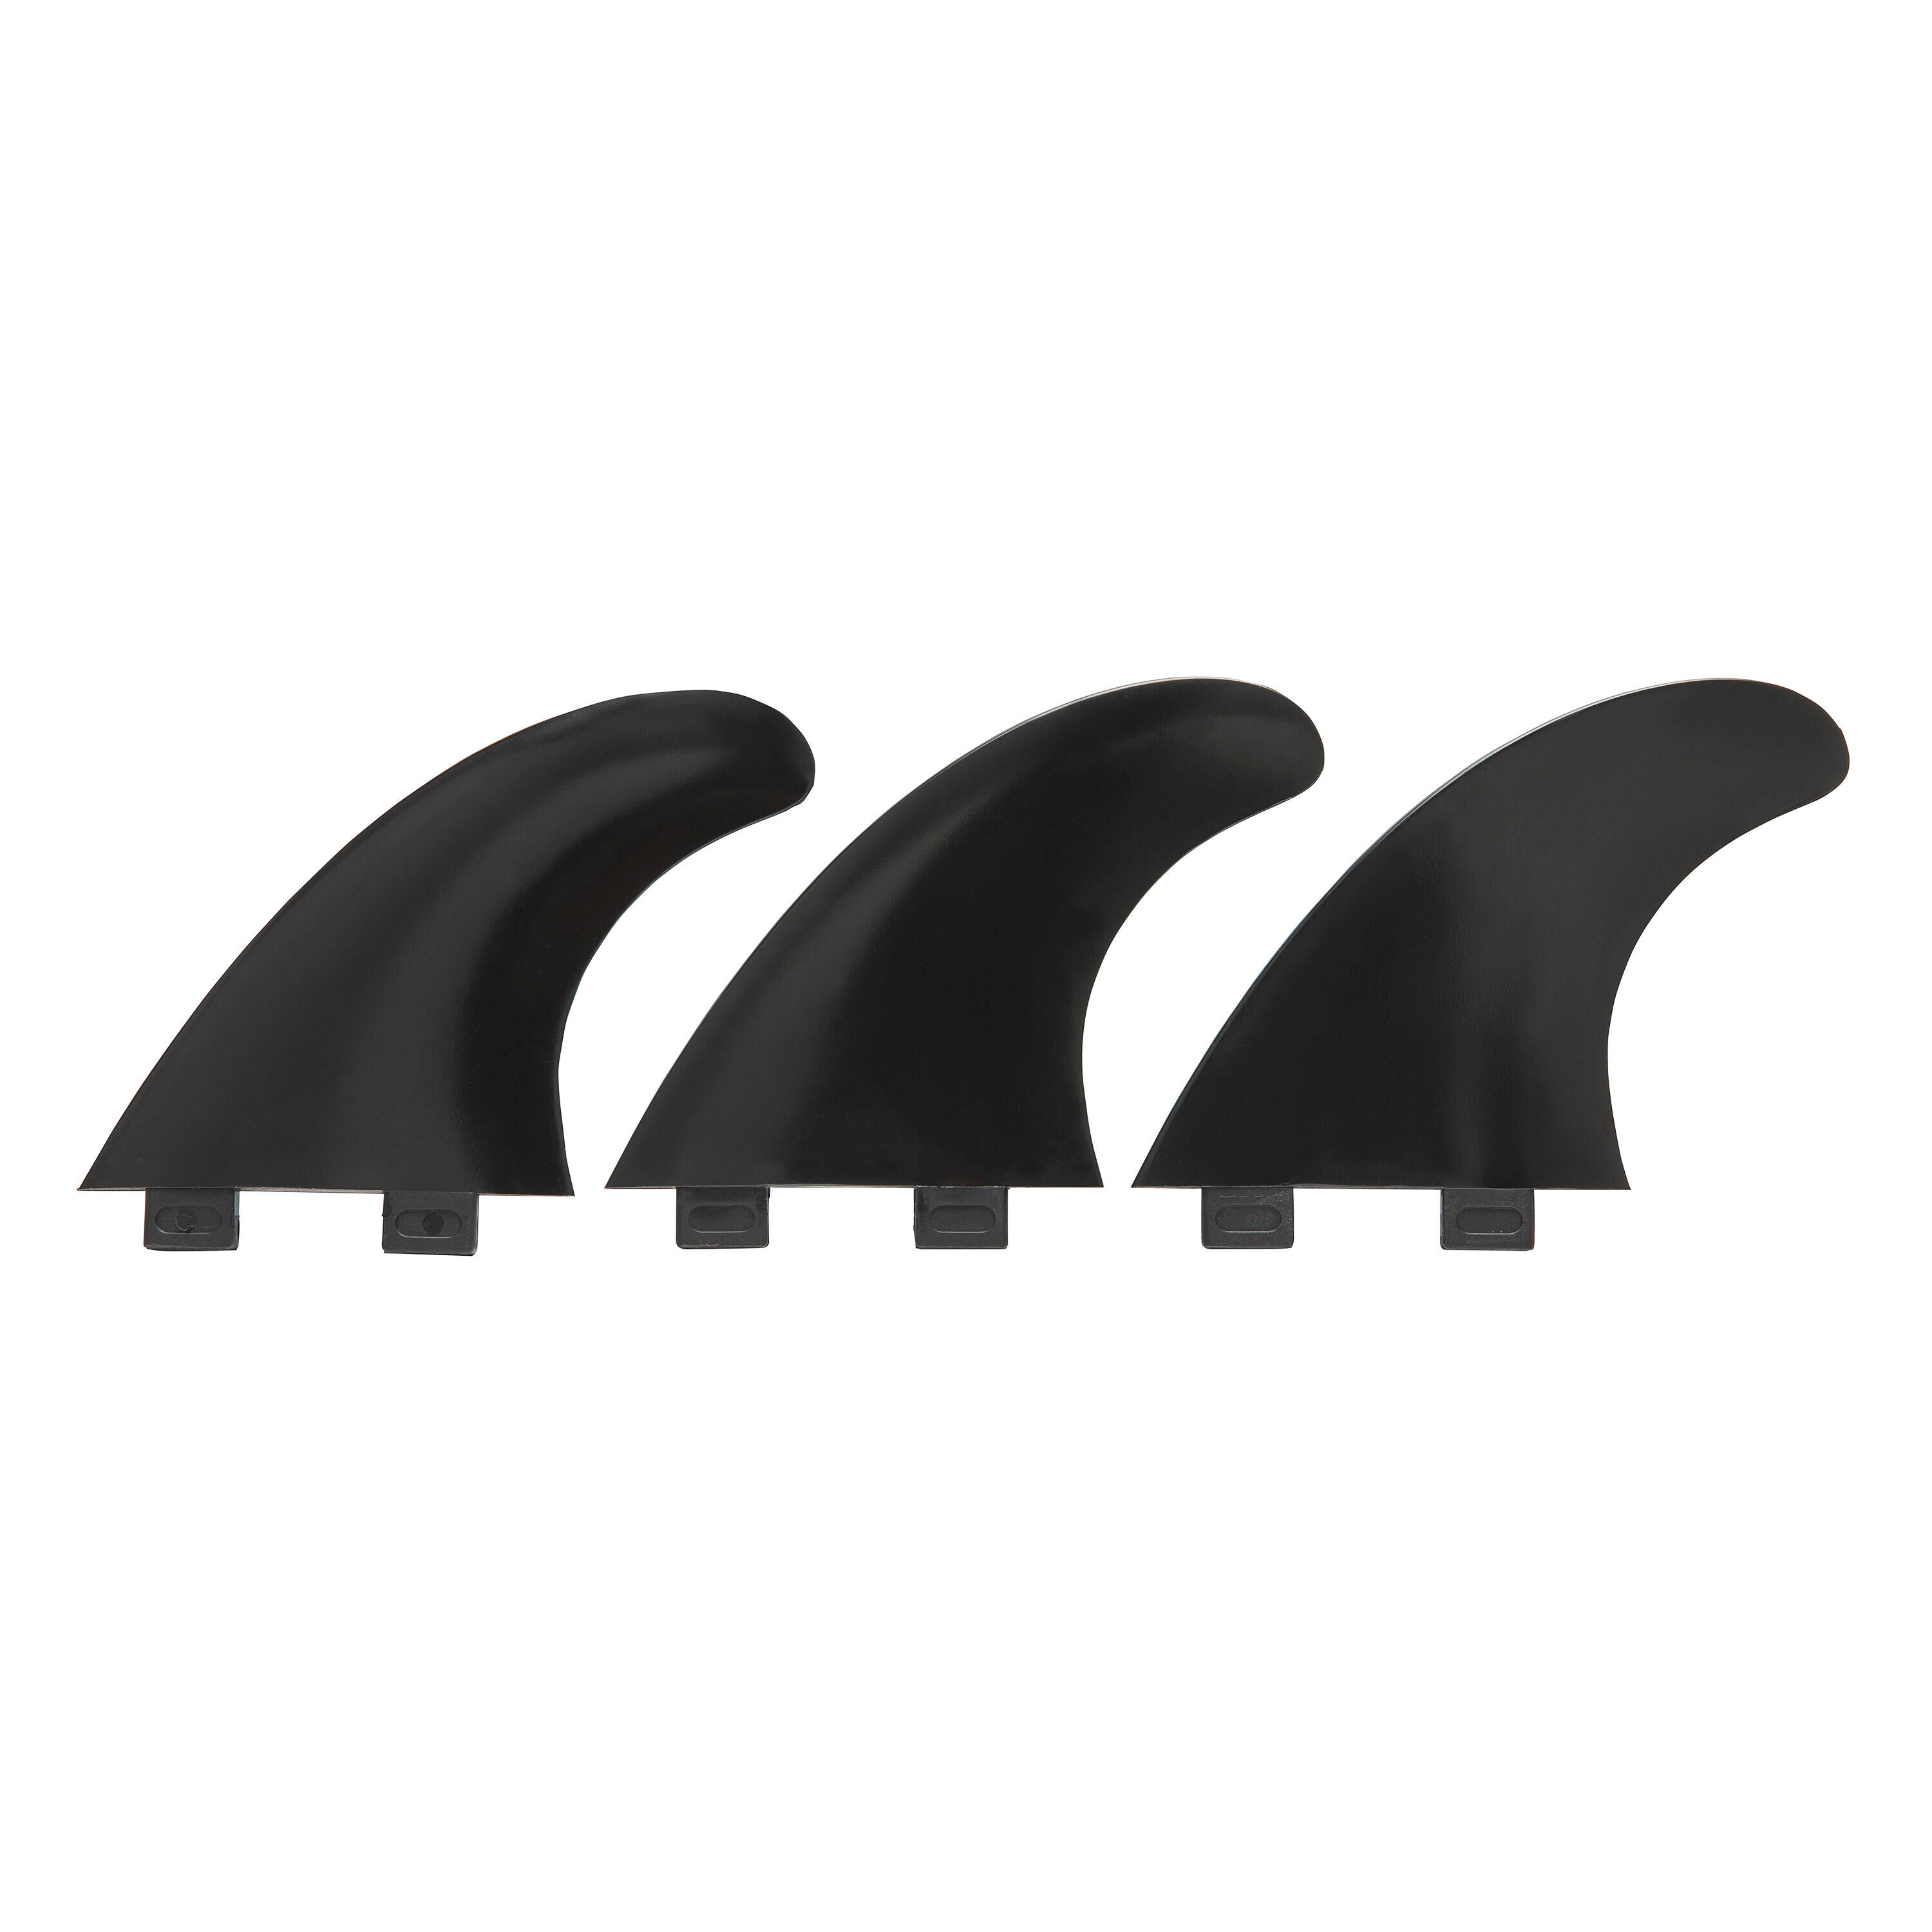 SURFSYSTEM 3 black fins compatible with FCS casings.